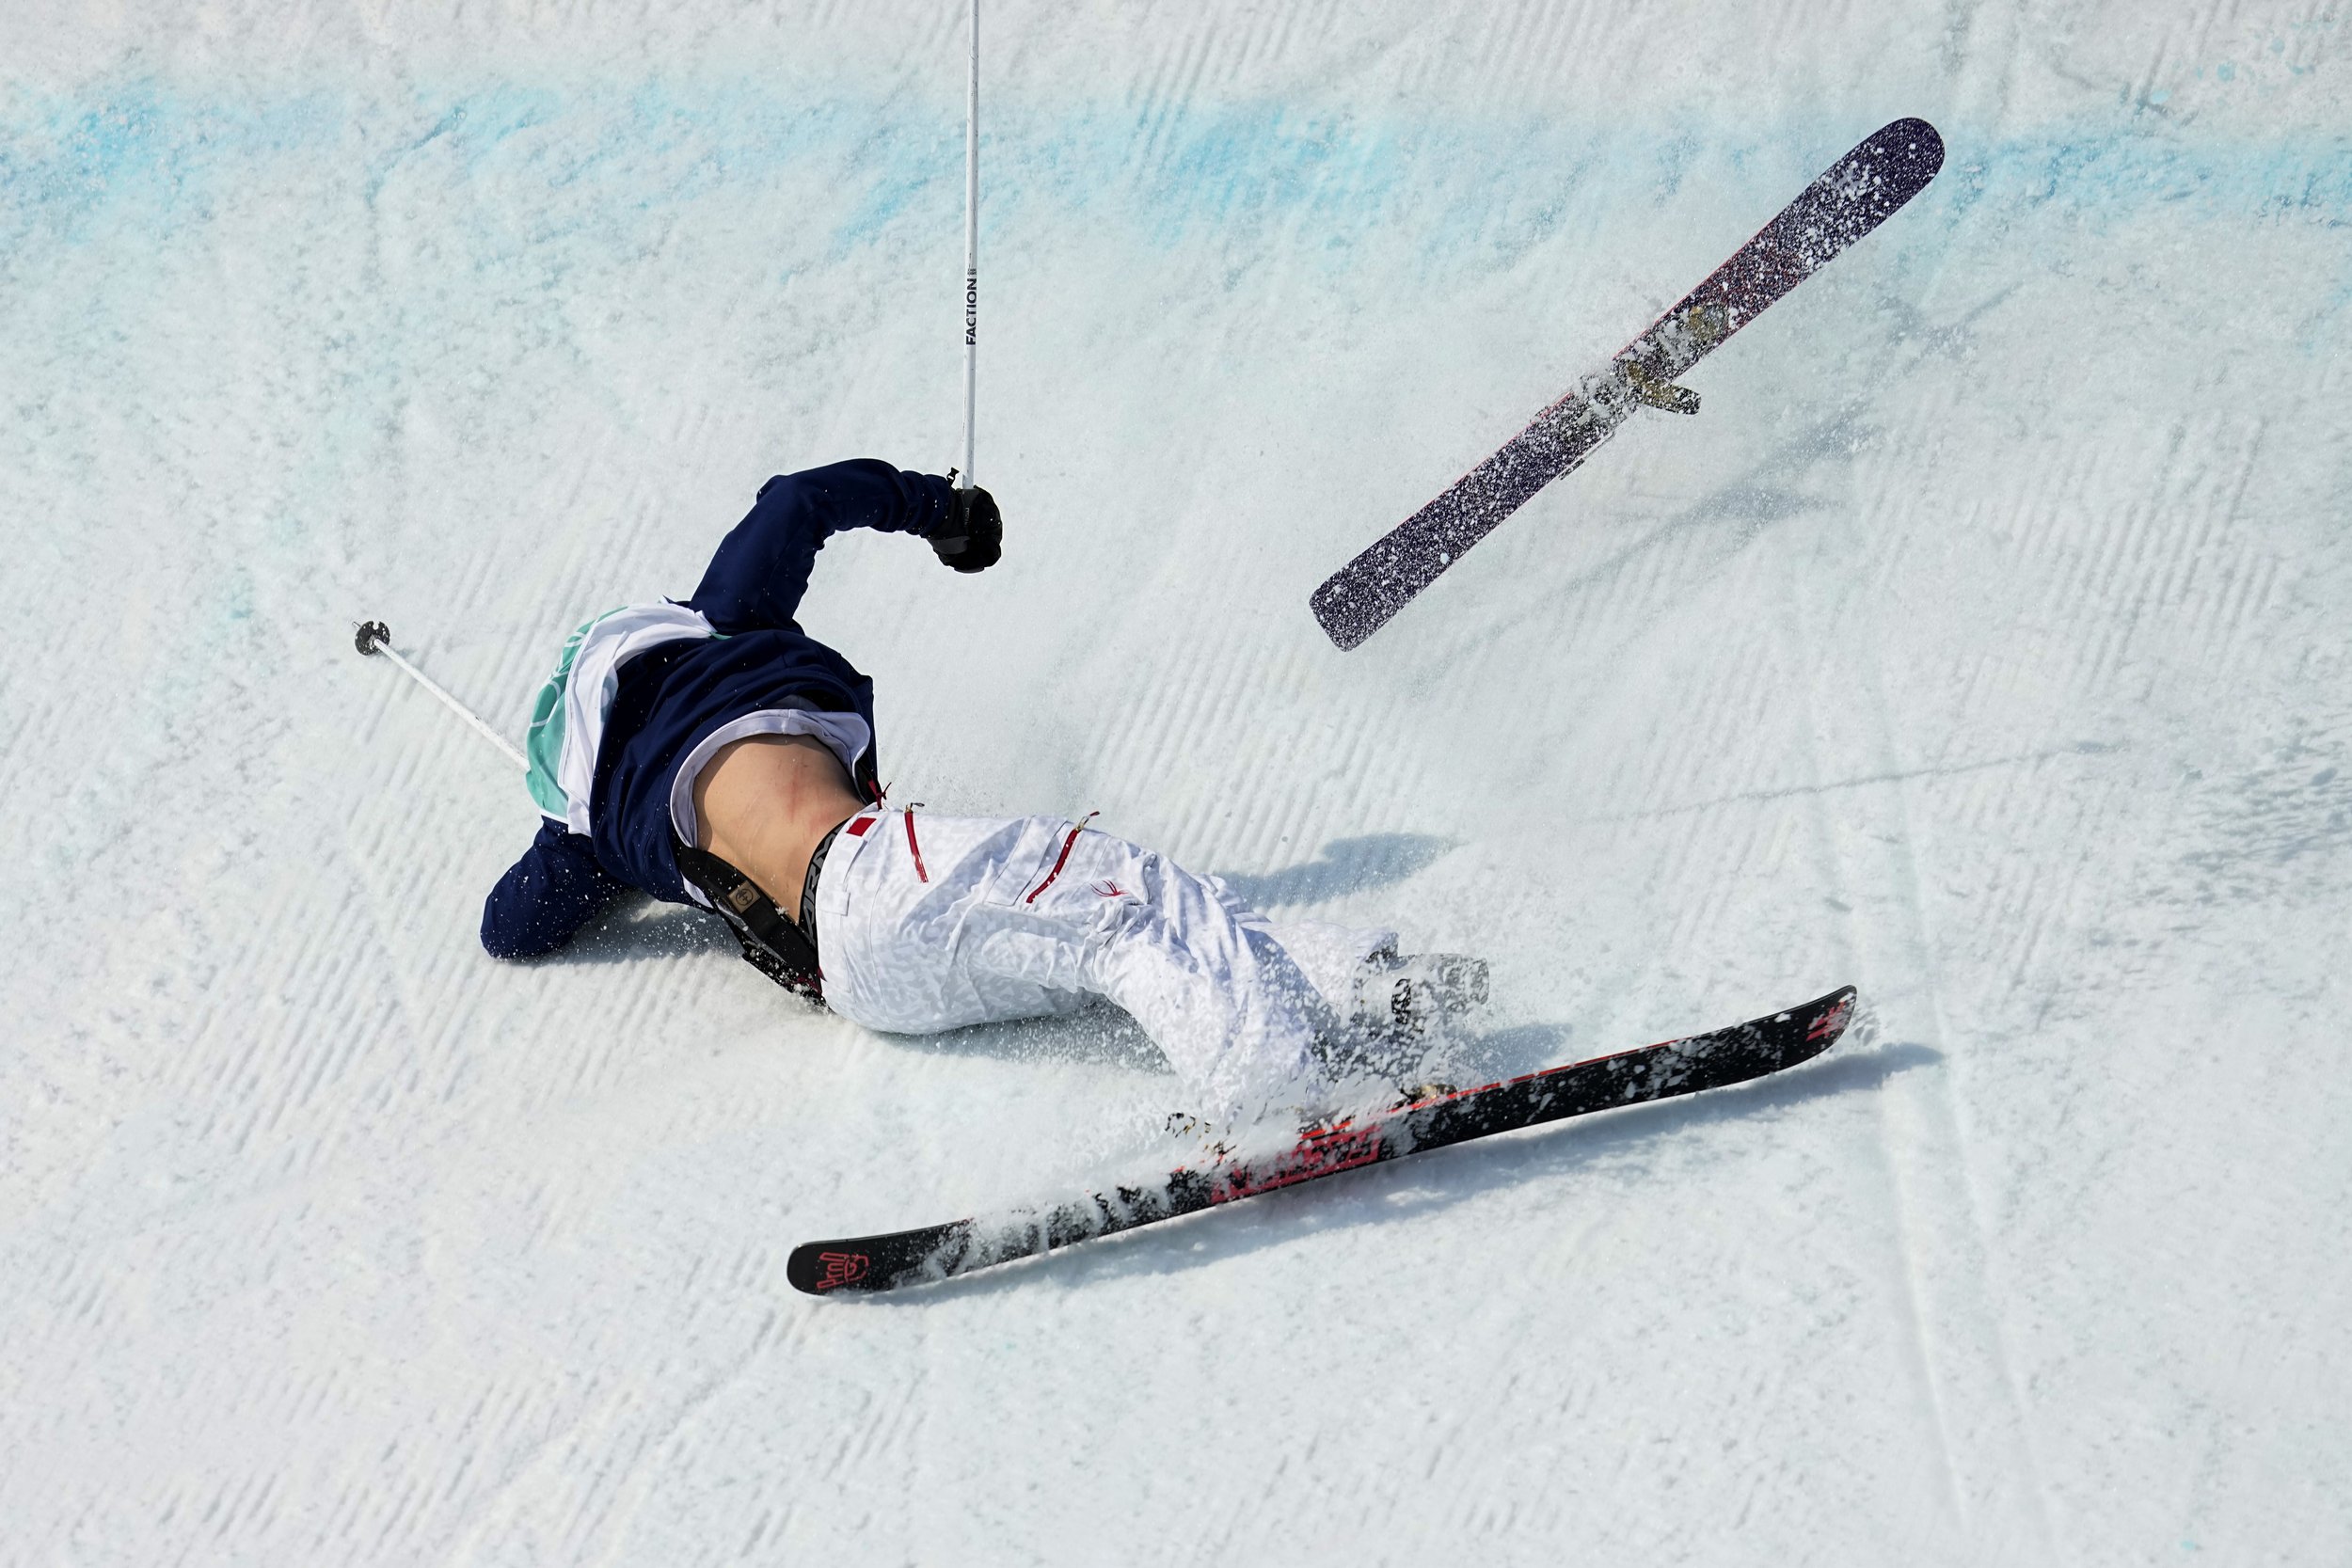  Mac Forehand of the United States crashes as he lands during the men's freestyle skiing big air finals of the 2022 Winter Olympics, Wednesday, Feb. 9, 2022, in Beijing. (AP Photo/Jae C. Hong) 